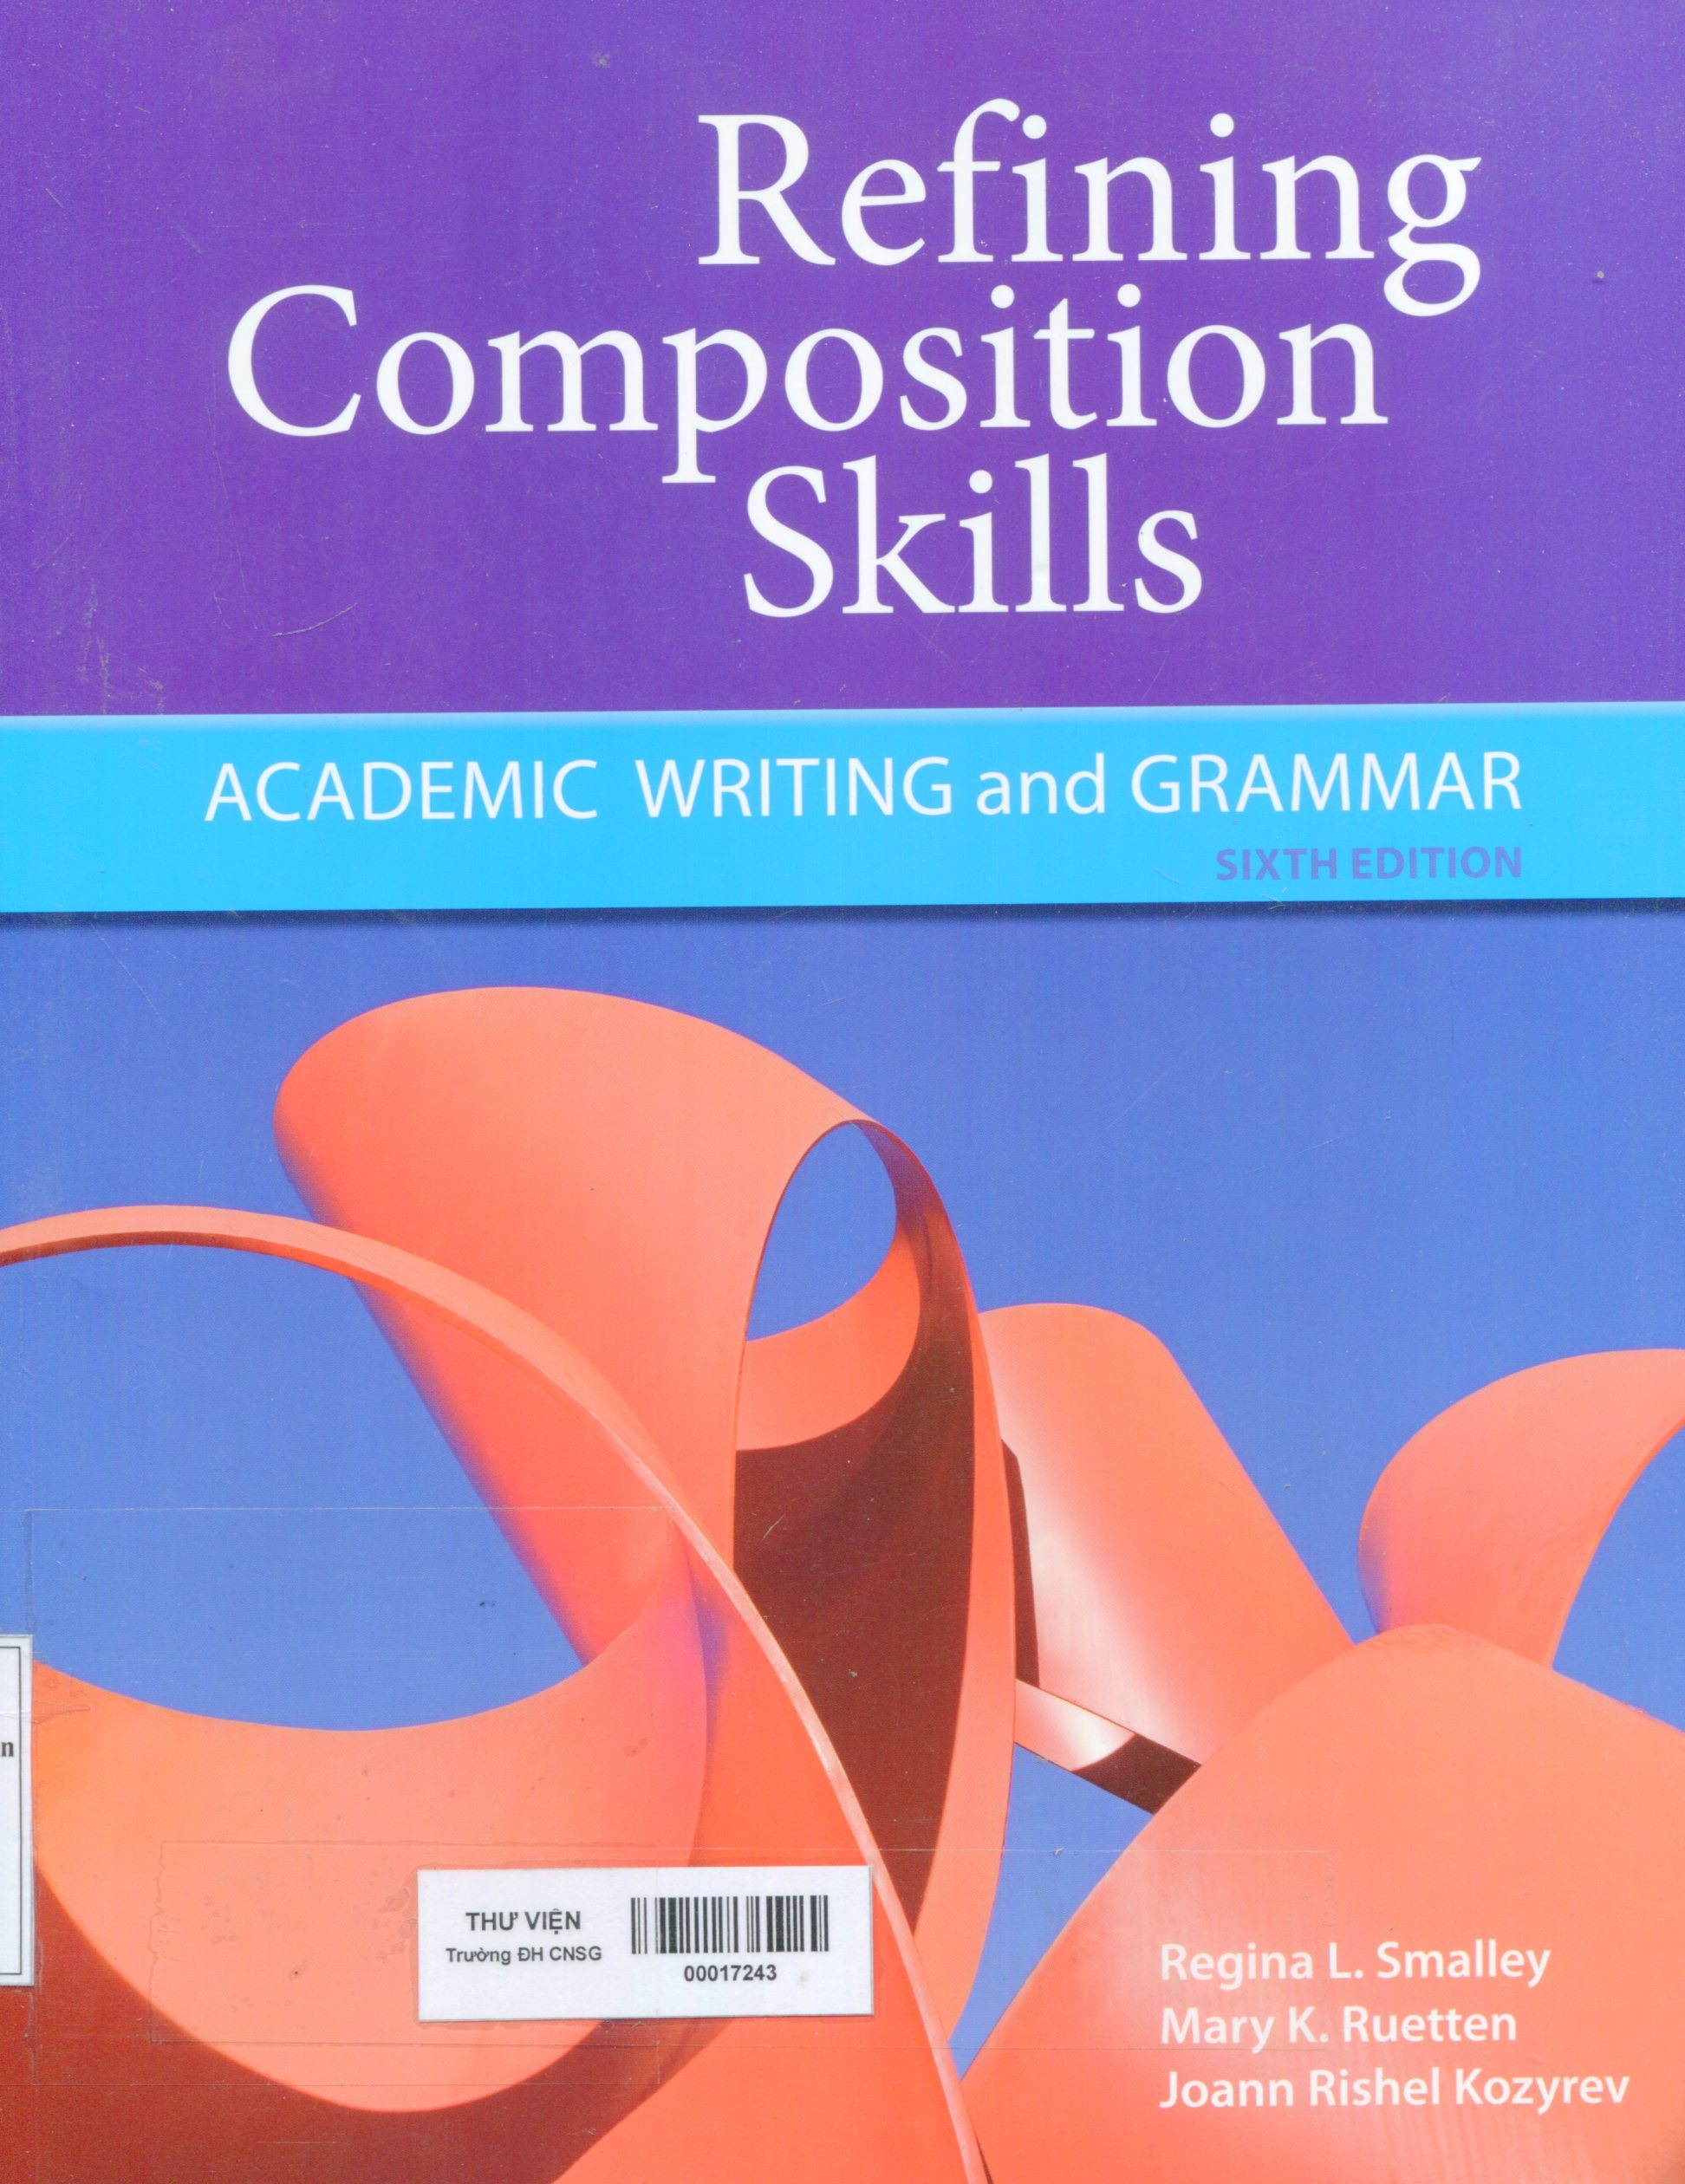 Refining composition skills : academic writing and grammar